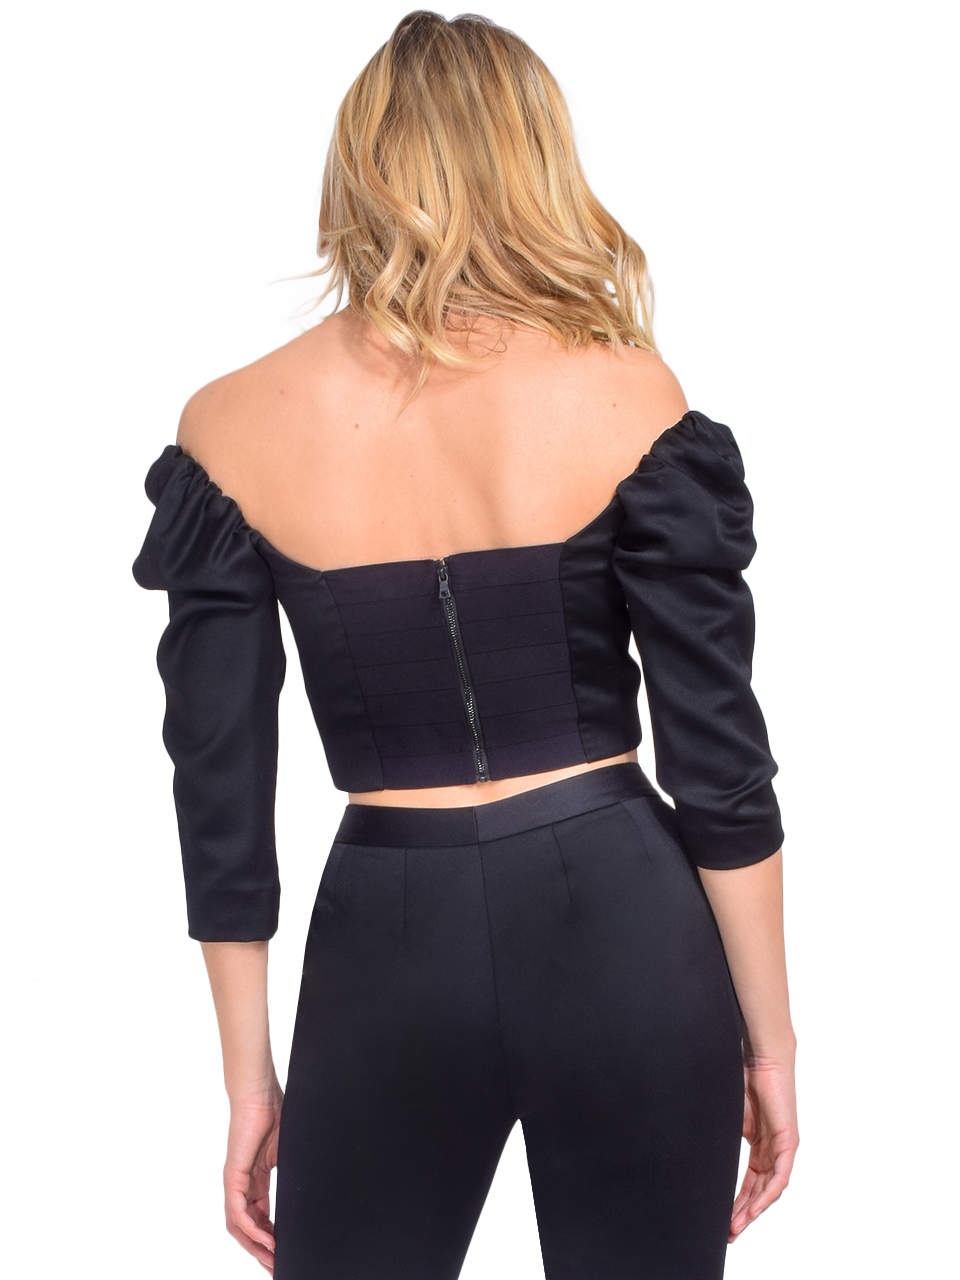 ALICE + OLIVIA Solange Mutton Sleeve Crop Top Back View 